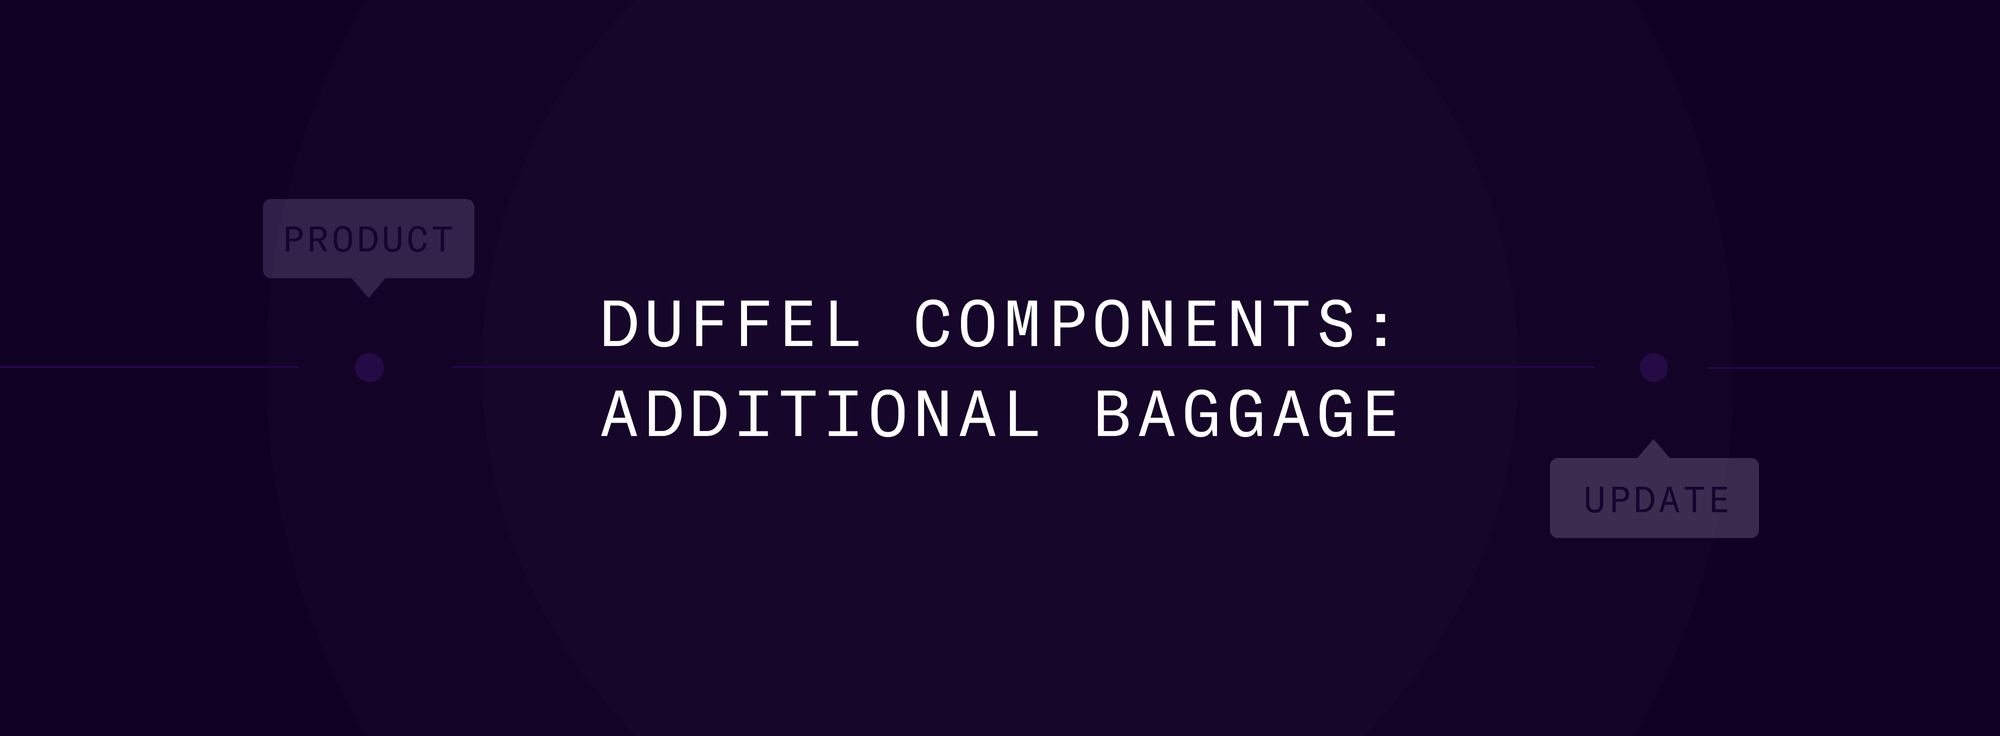 Seamlessly manage additional baggage requests with Duffel Components